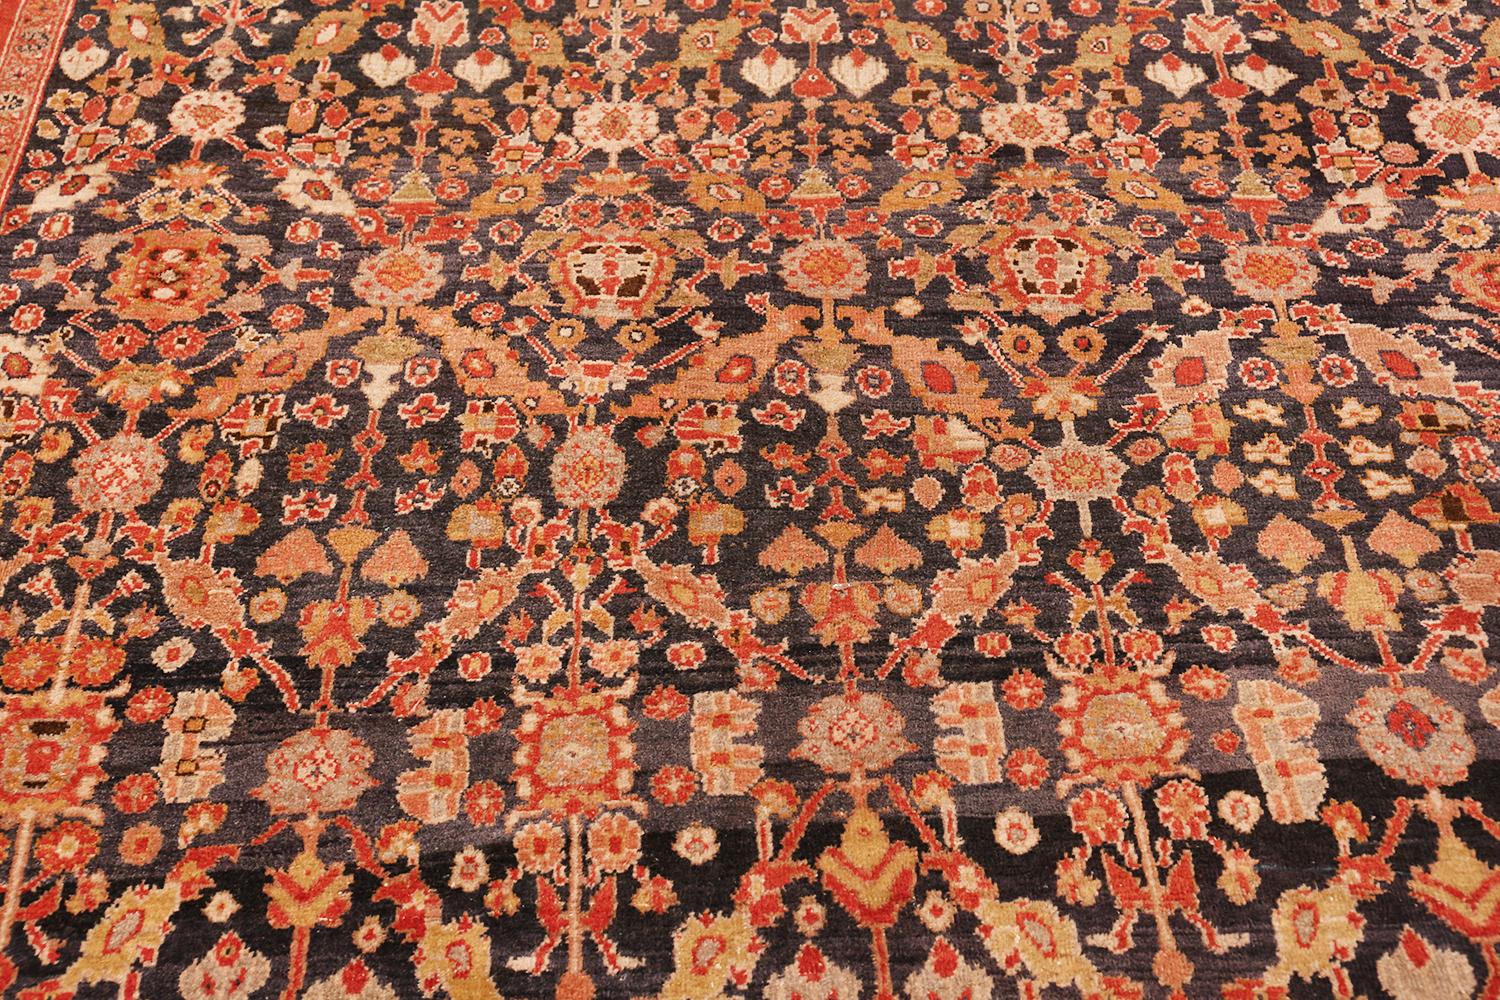 Antique Persian Sultanabad Rug. Size: 10 ft 2 in x 13 ft 2 in (3.1 m x 4.01 m) (Persisch)